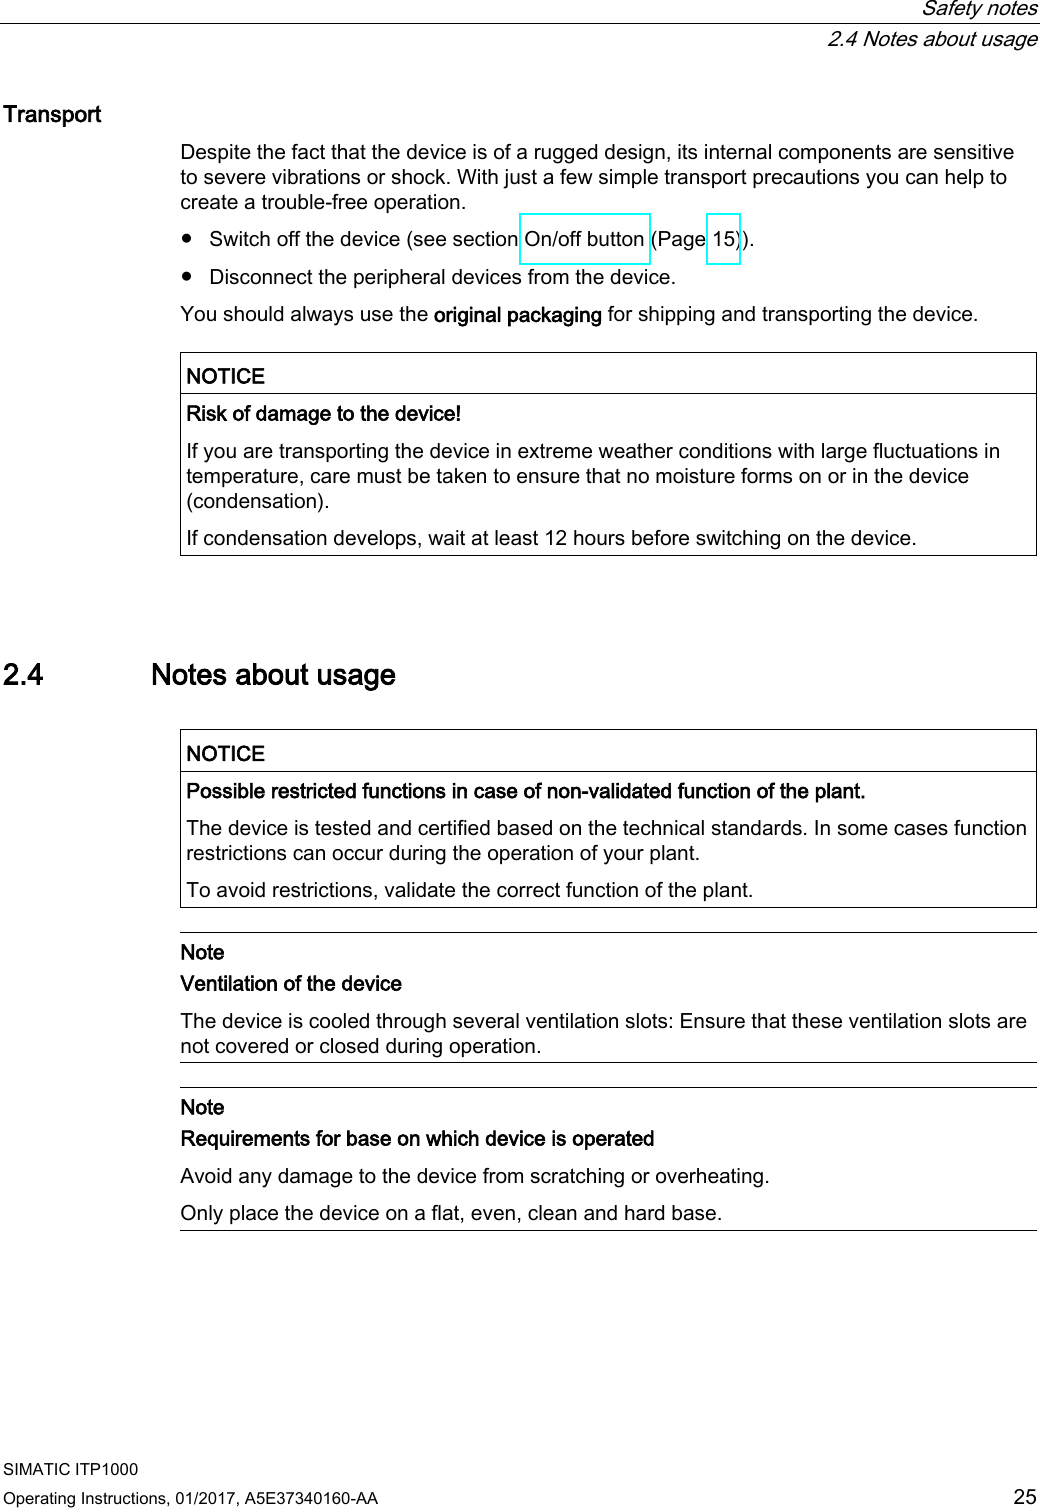  Safety notes  2.4 Notes about usage SIMATIC ITP1000 Operating Instructions, 01/2017, A5E37340160-AA  25 Transport Despite the fact that the device is of a rugged design, its internal components are sensitive to severe vibrations or shock. With just a few simple transport precautions you can help to create a trouble-free operation.  ● Switch off the device (see section On/off button (Page 15)). ● Disconnect the peripheral devices from the device. You should always use the original packaging for shipping and transporting the device.   NOTICE Risk of damage to the device! If you are transporting the device in extreme weather conditions with large fluctuations in temperature, care must be taken to ensure that no moisture forms on or in the device (condensation). If condensation develops, wait at least 12 hours before switching on the device.  2.4 Notes about usage   NOTICE Possible restricted functions in case of non-validated function of the plant. The device is tested and certified based on the technical standards. In some cases function restrictions can occur during the operation of your plant. To avoid restrictions, validate the correct function of the plant.   Note Ventilation of the device The device is cooled through several ventilation slots: Ensure that these ventilation slots are not covered or closed during operation.   Note Requirements for base on which device is operated Avoid any damage to the device from scratching or overheating. Only place the device on a flat, even, clean and hard base.   